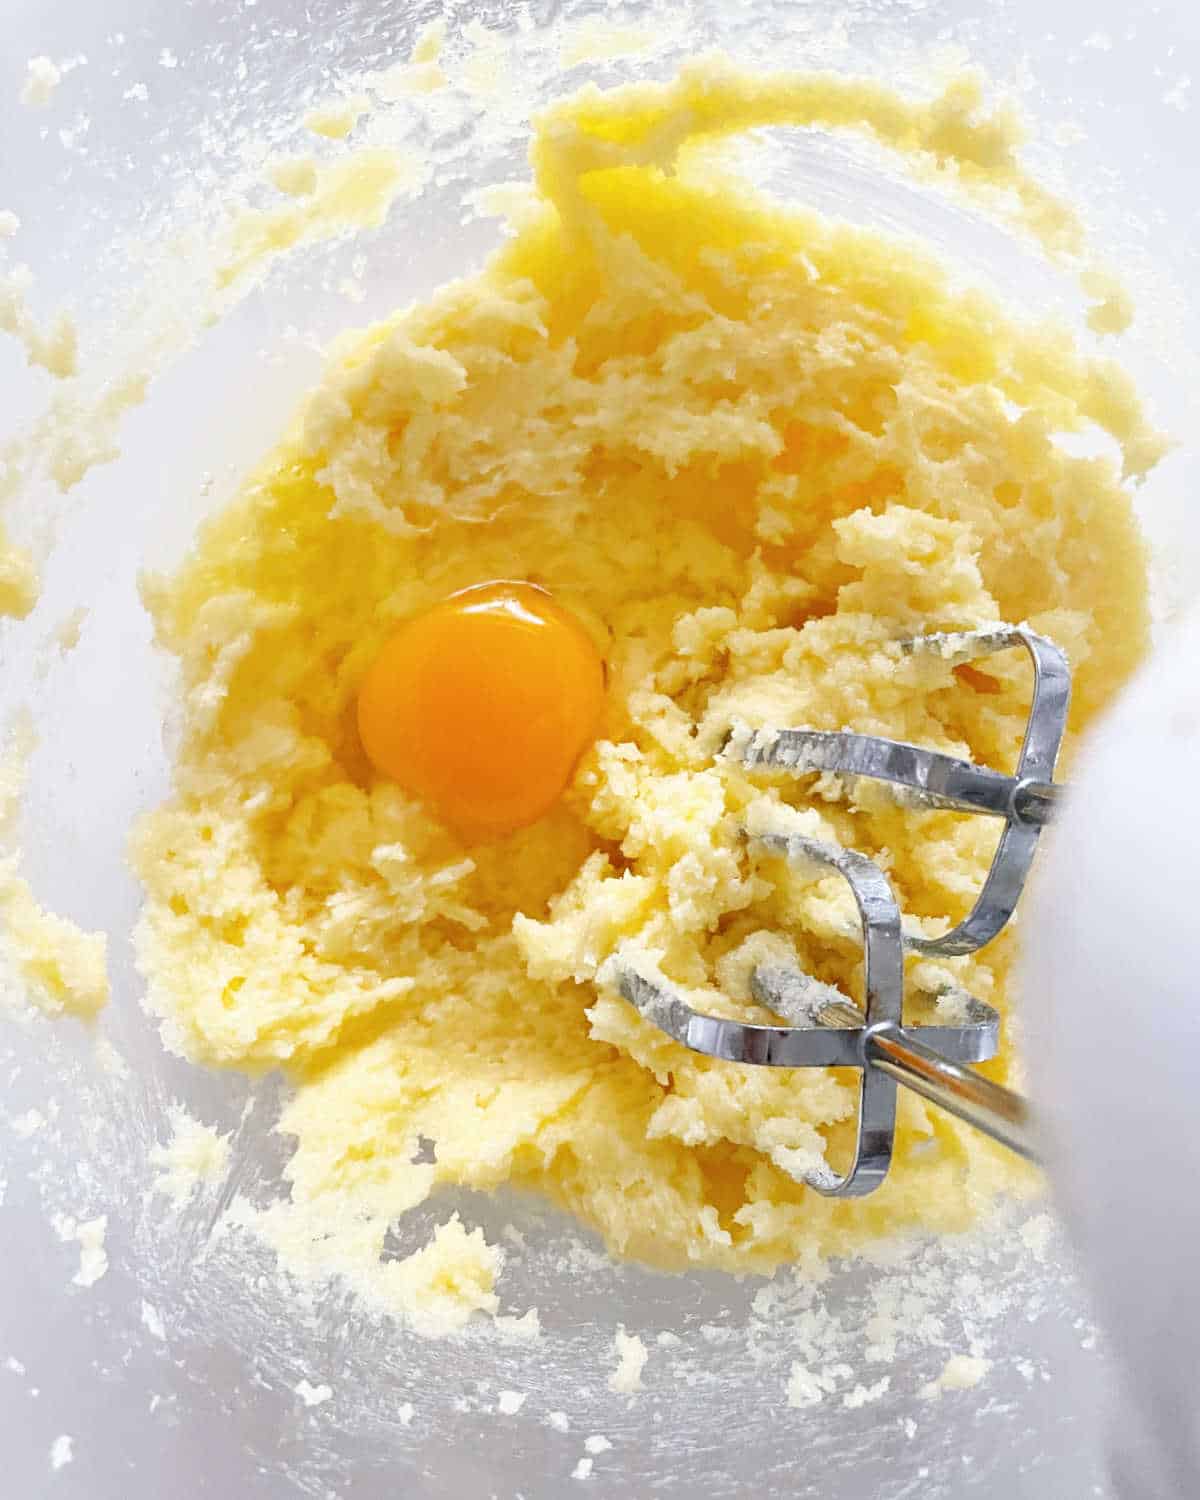 Butter and sugar mixed in glass bowl, one whole egg. White surface.